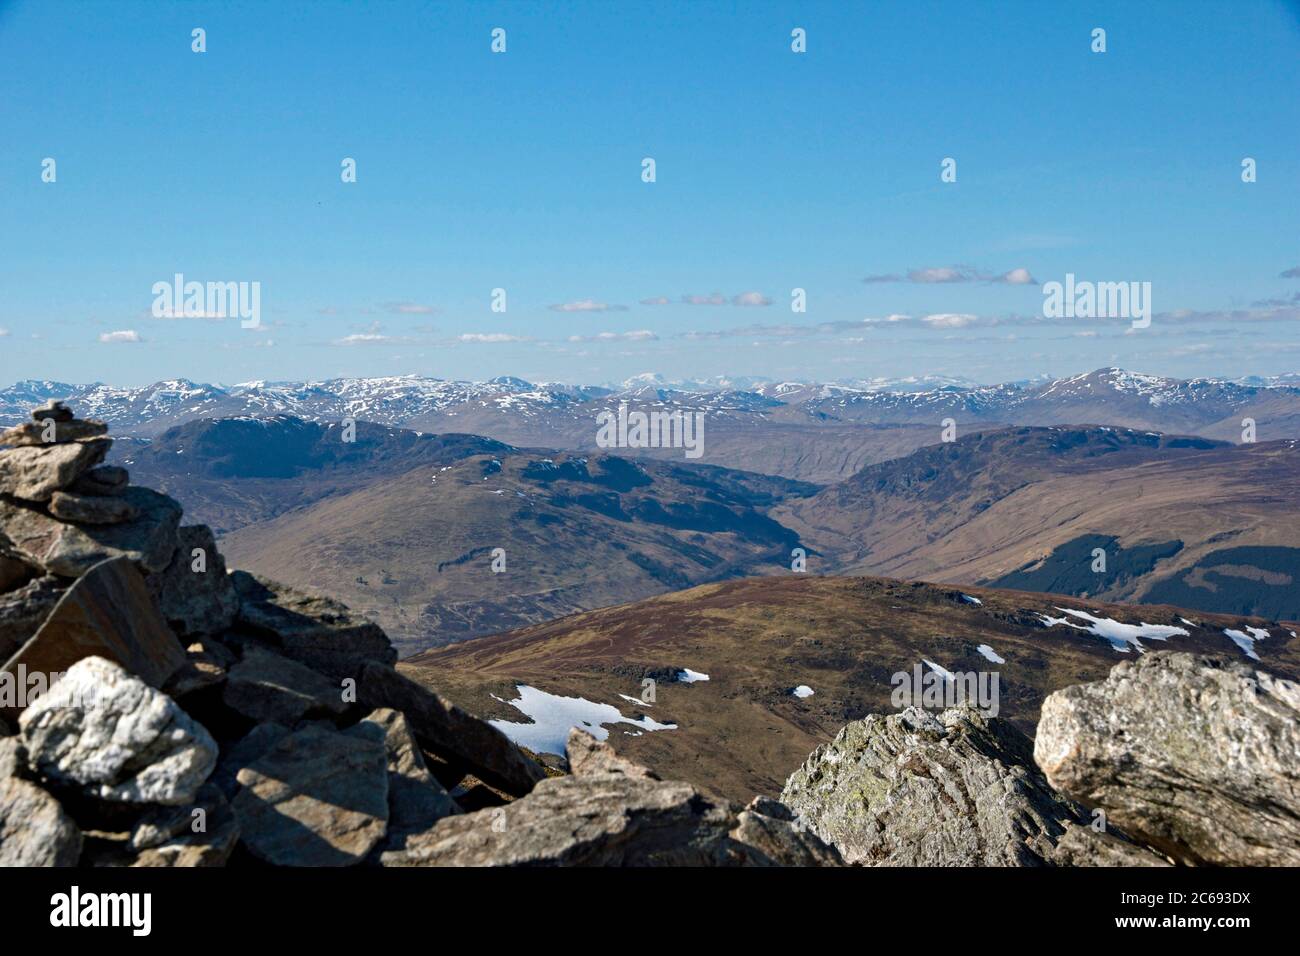 View from Ben More in the Trossach national park, of the surrounding Highlands scnery, Scotland Stock Photo